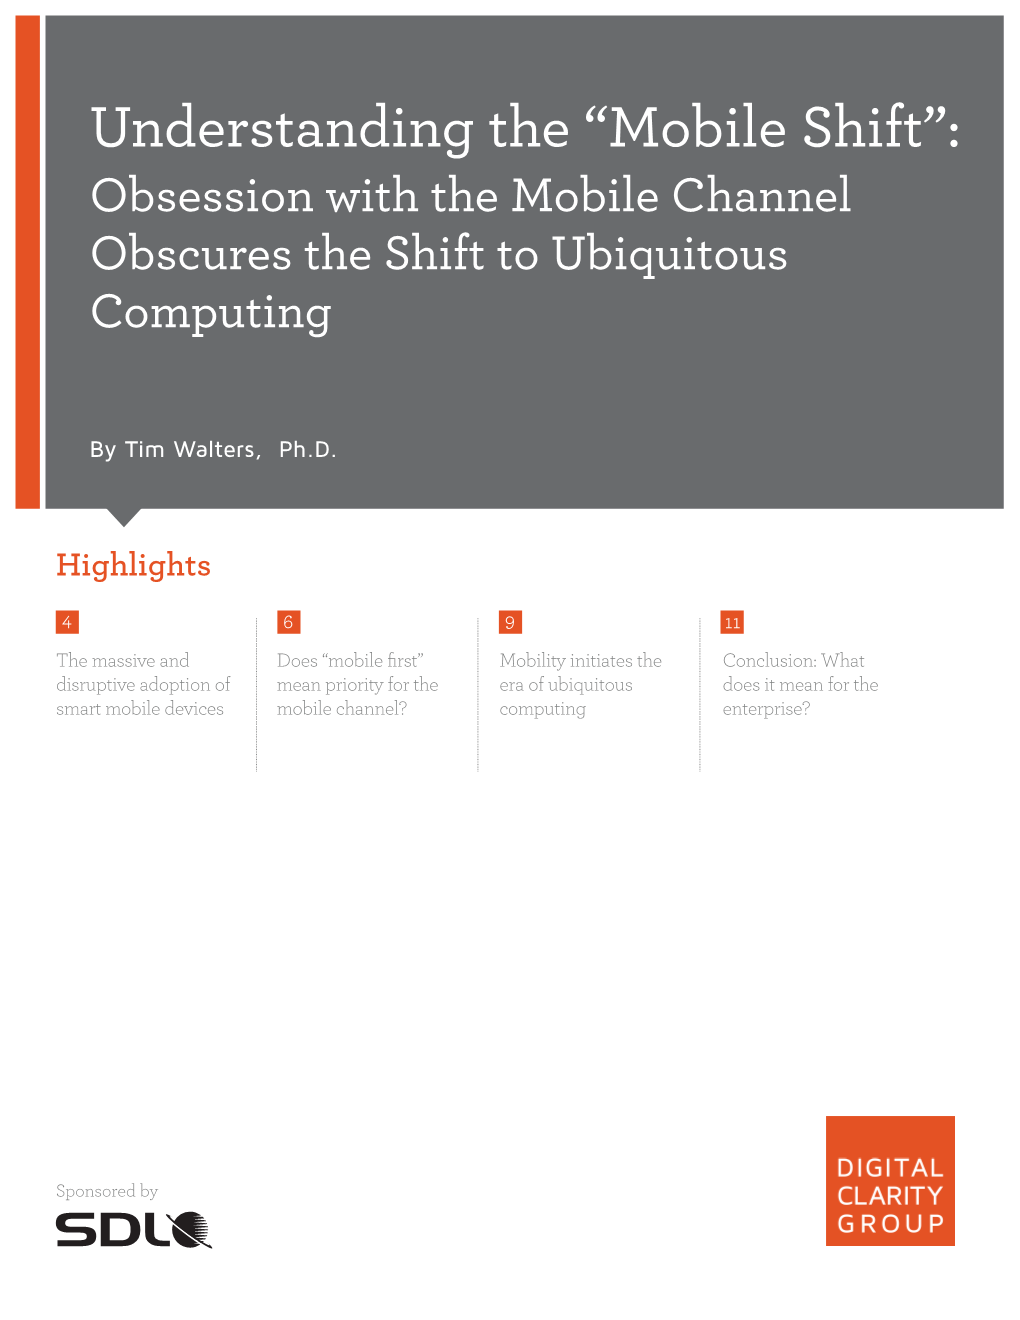 Mobile Shift”: Obsession with the Mobile Channel Obscures the Shift to Ubiquitous Computing